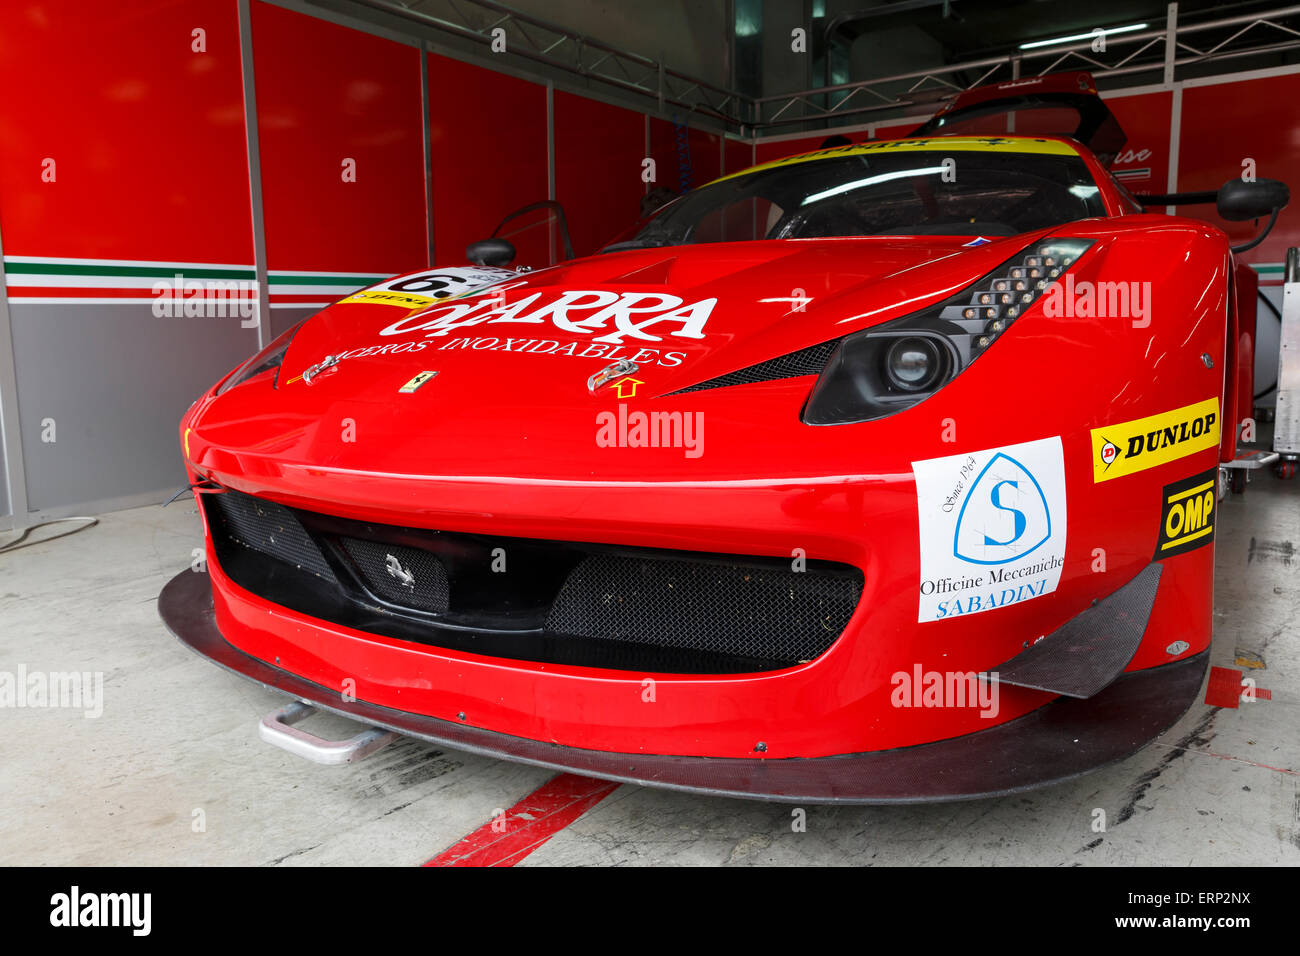 Imola, Italy – May 16, 2015: Ferrari F458 Italia GT3 of Af Corse Team,  in action during the European Le Mans Series Stock Photo